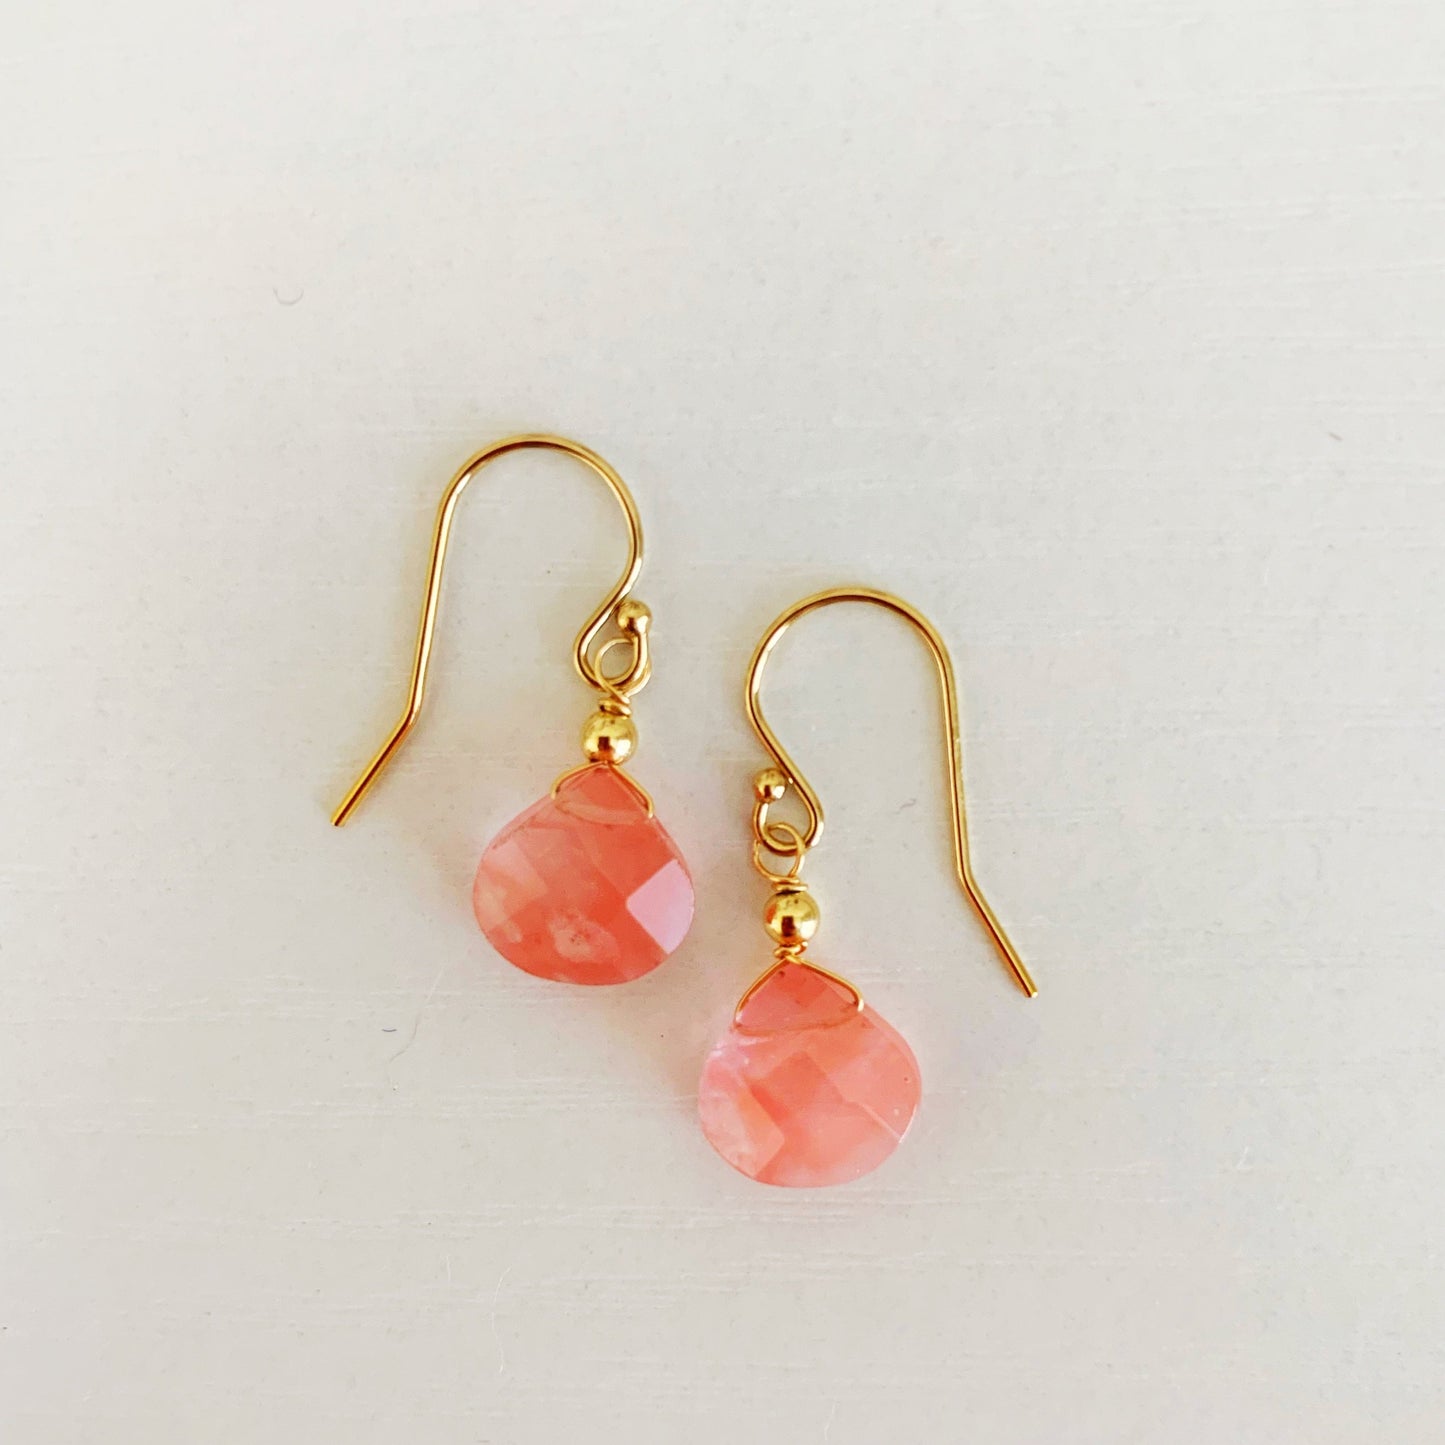 Chatham Earrings by Mermaids + Madeleines feature cherry quartz faceted drops and 14k gold filled findings. This pair is photographed on a white background